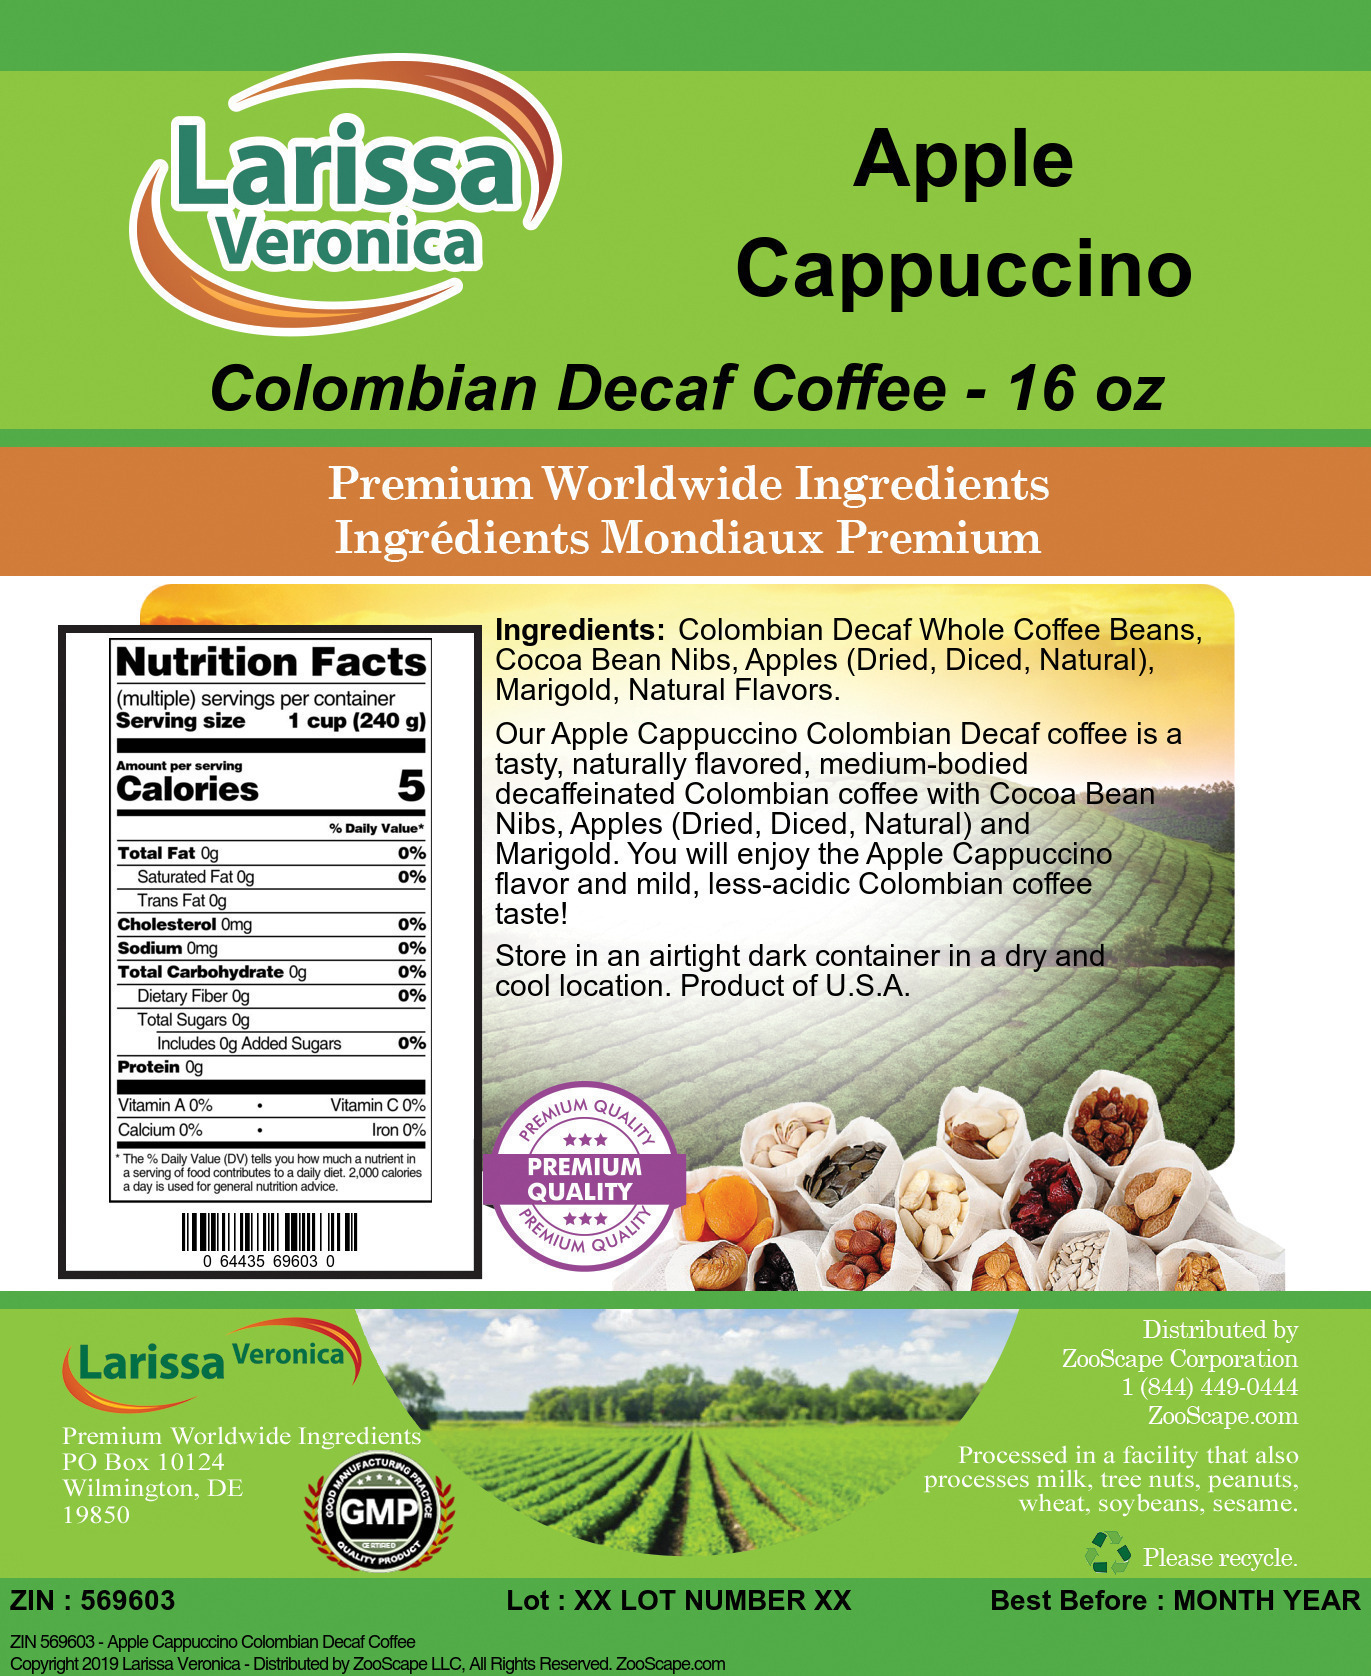 Apple Cappuccino Colombian Decaf Coffee - Label